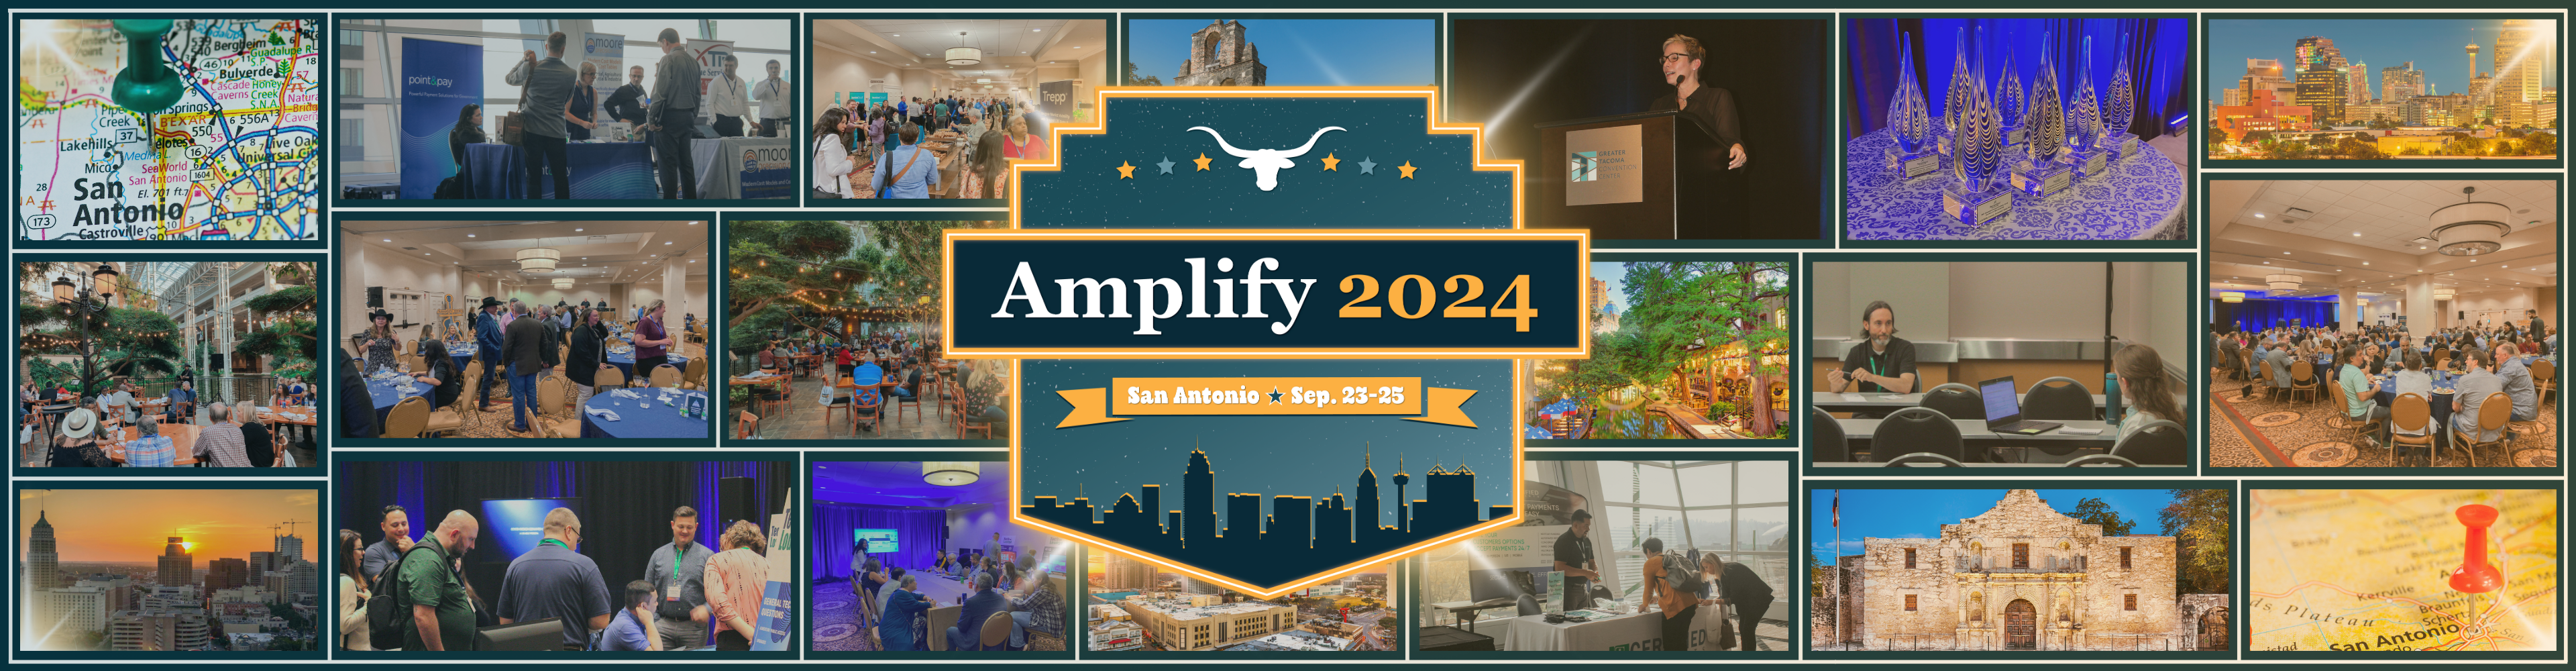 amplify_2024_photo_collage